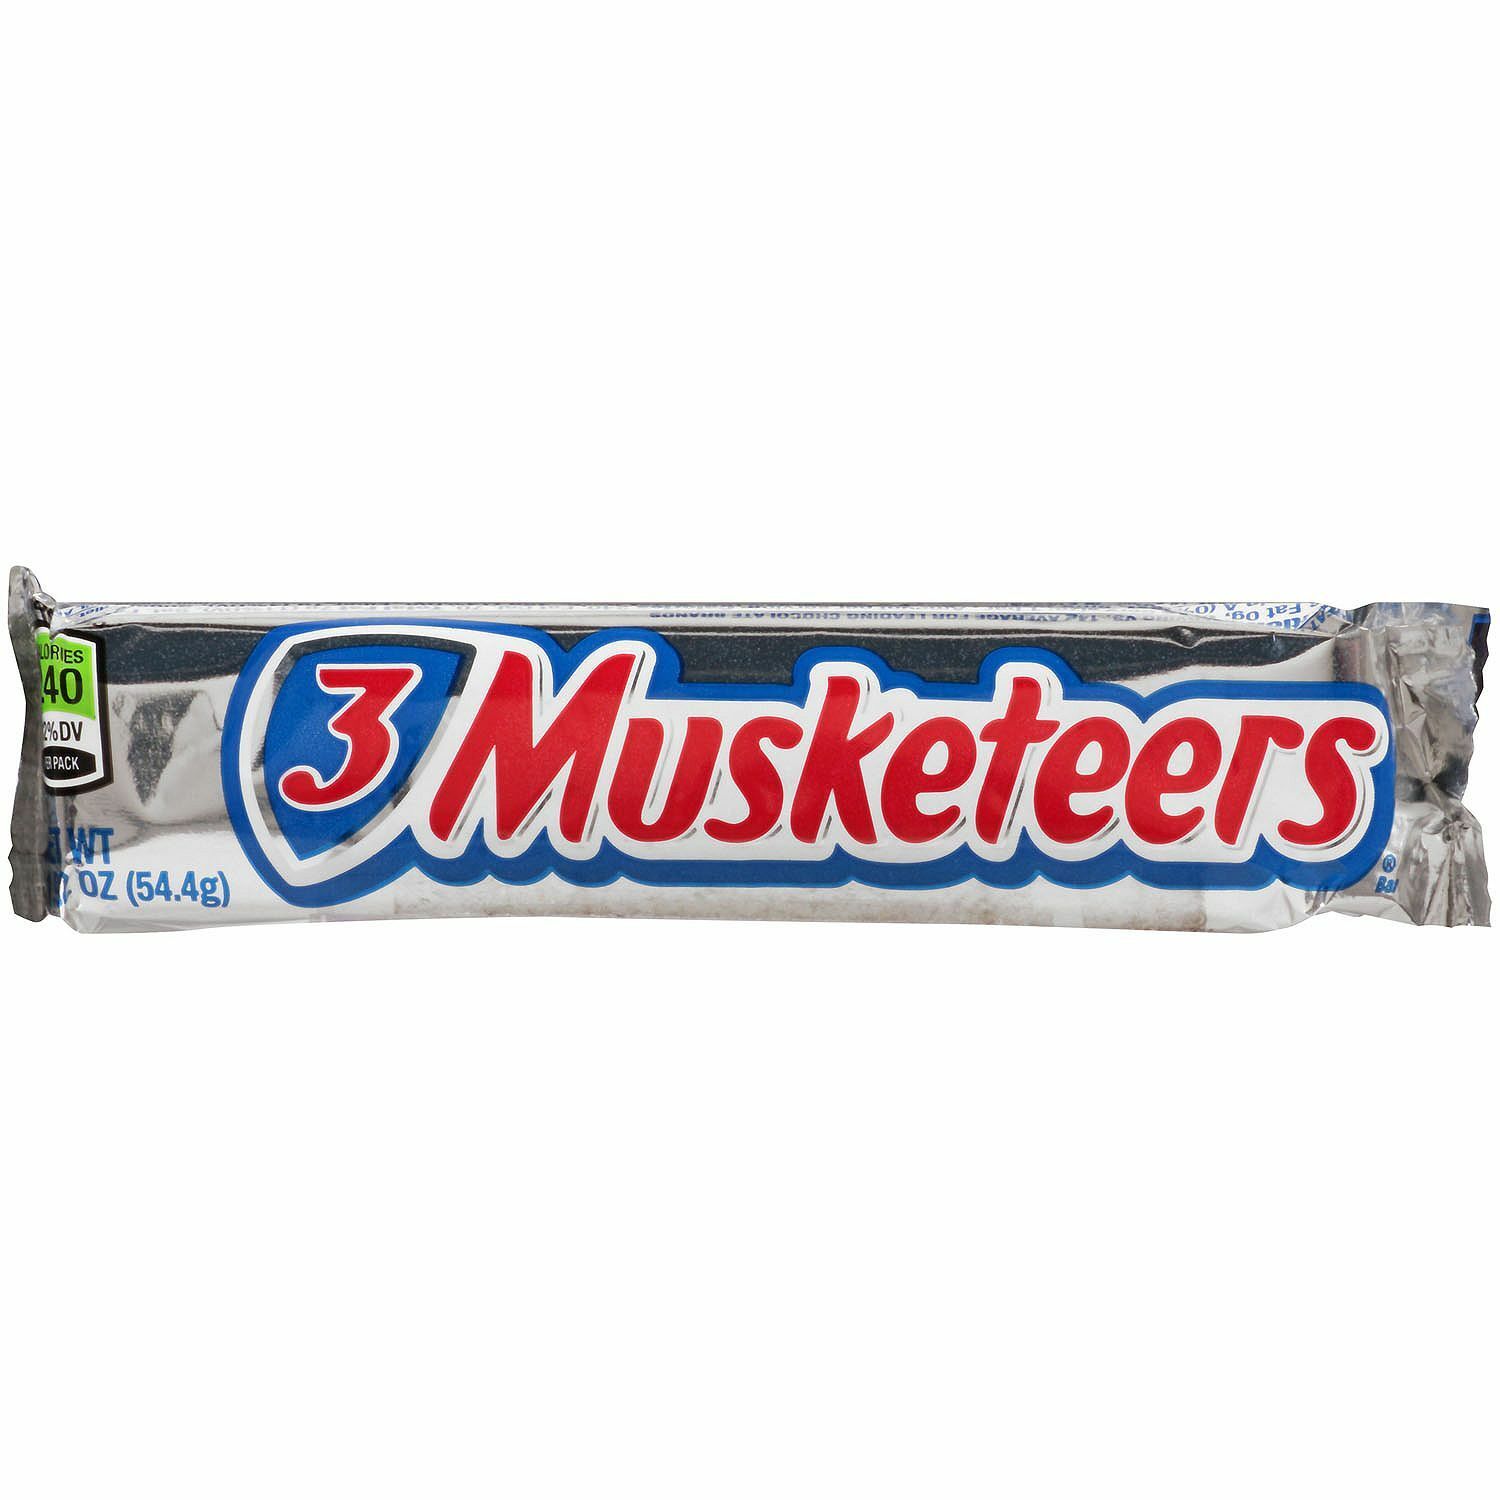 3-musketeers-bar-24-count-s-o-wholesale